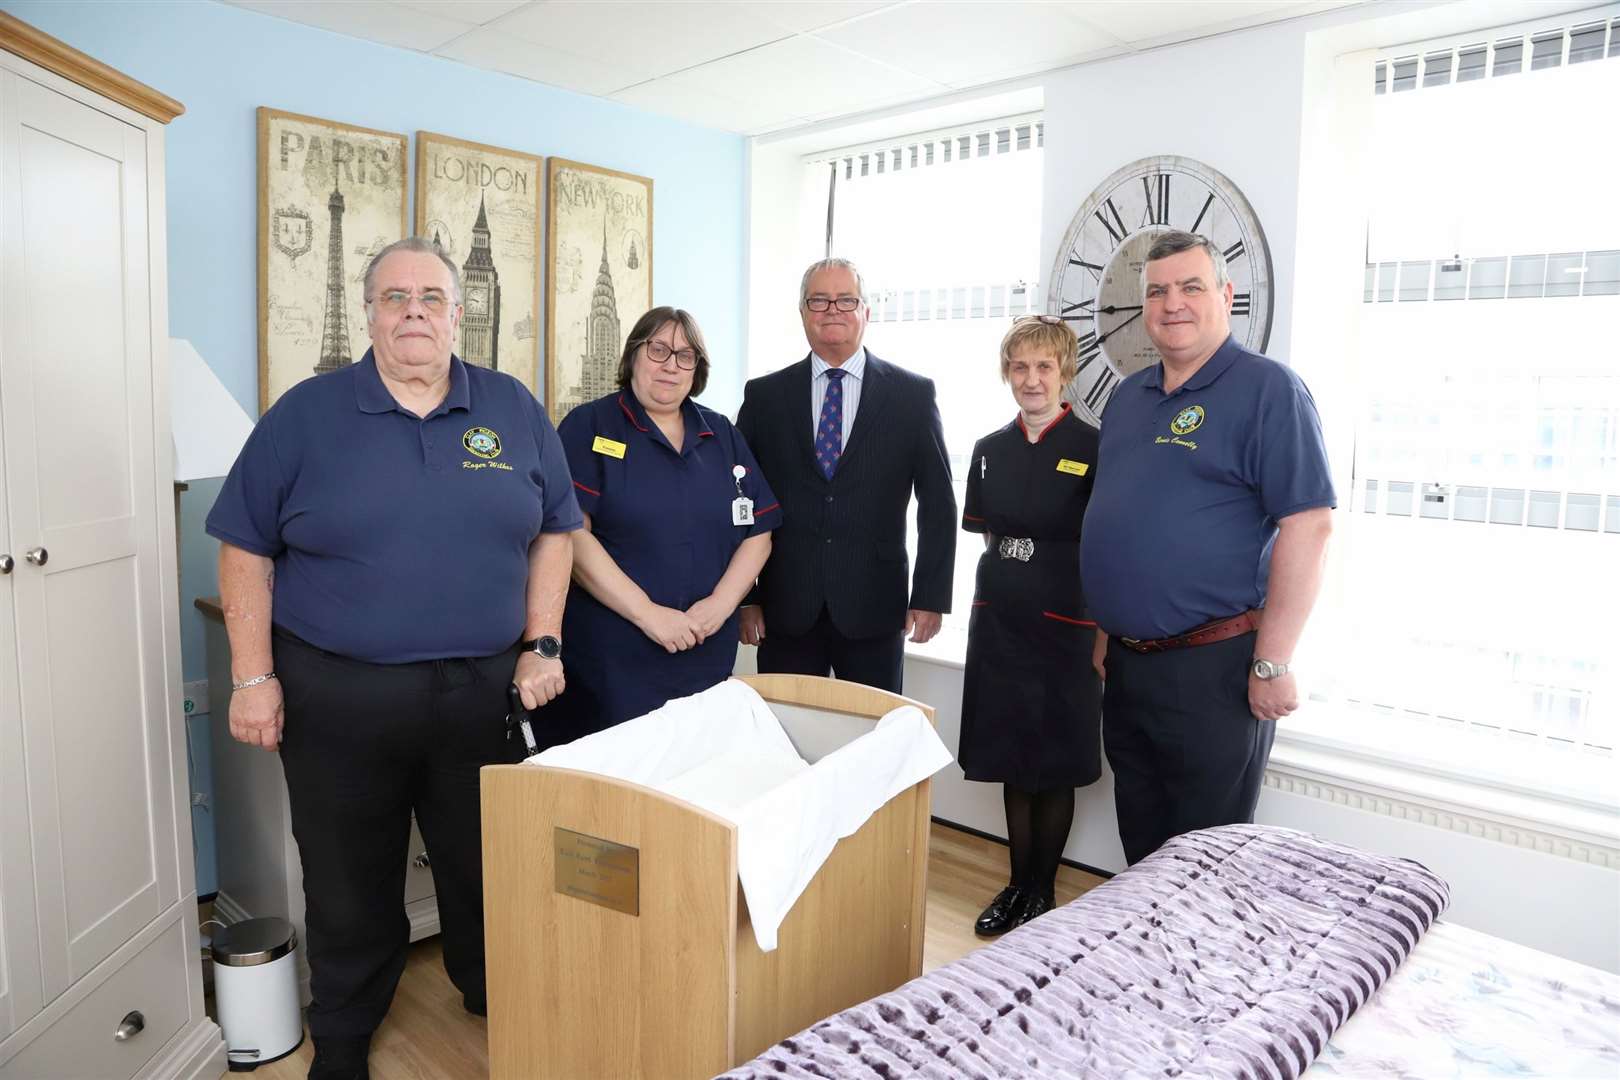 East Kent Freemasons donate an Abigail’s Footsteps’ Abi Cooling Cot to Medway NHS Foundation Trust. From left: Roger Wilkes, Yvonne Morrison, Richard Wingett, Alison Herron and Bernie Connol